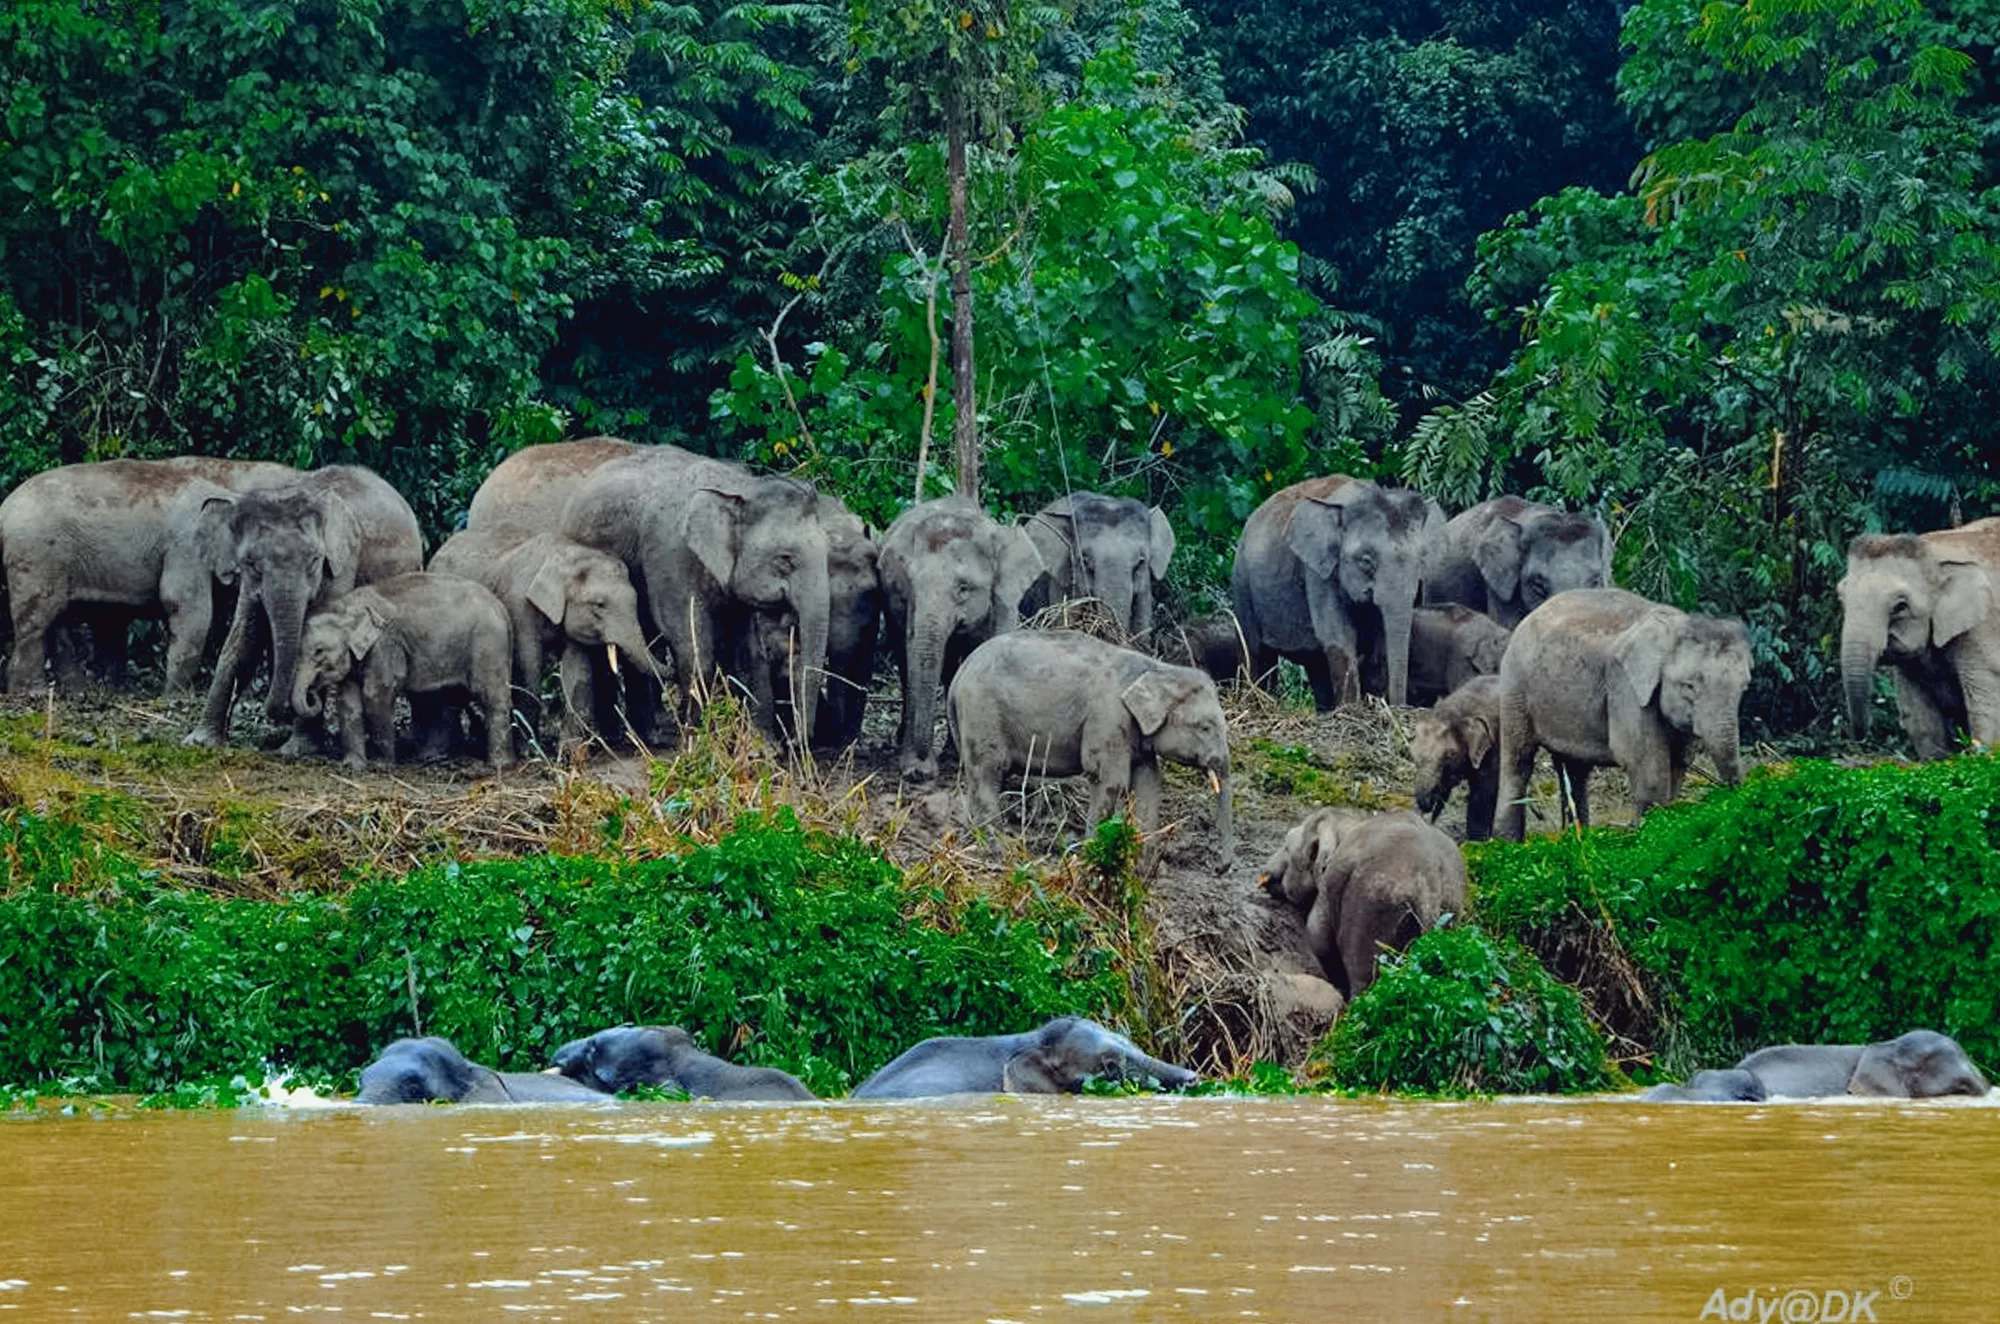 Elephants along the Kinabatangan River, a famous tourist attraction in Sabah